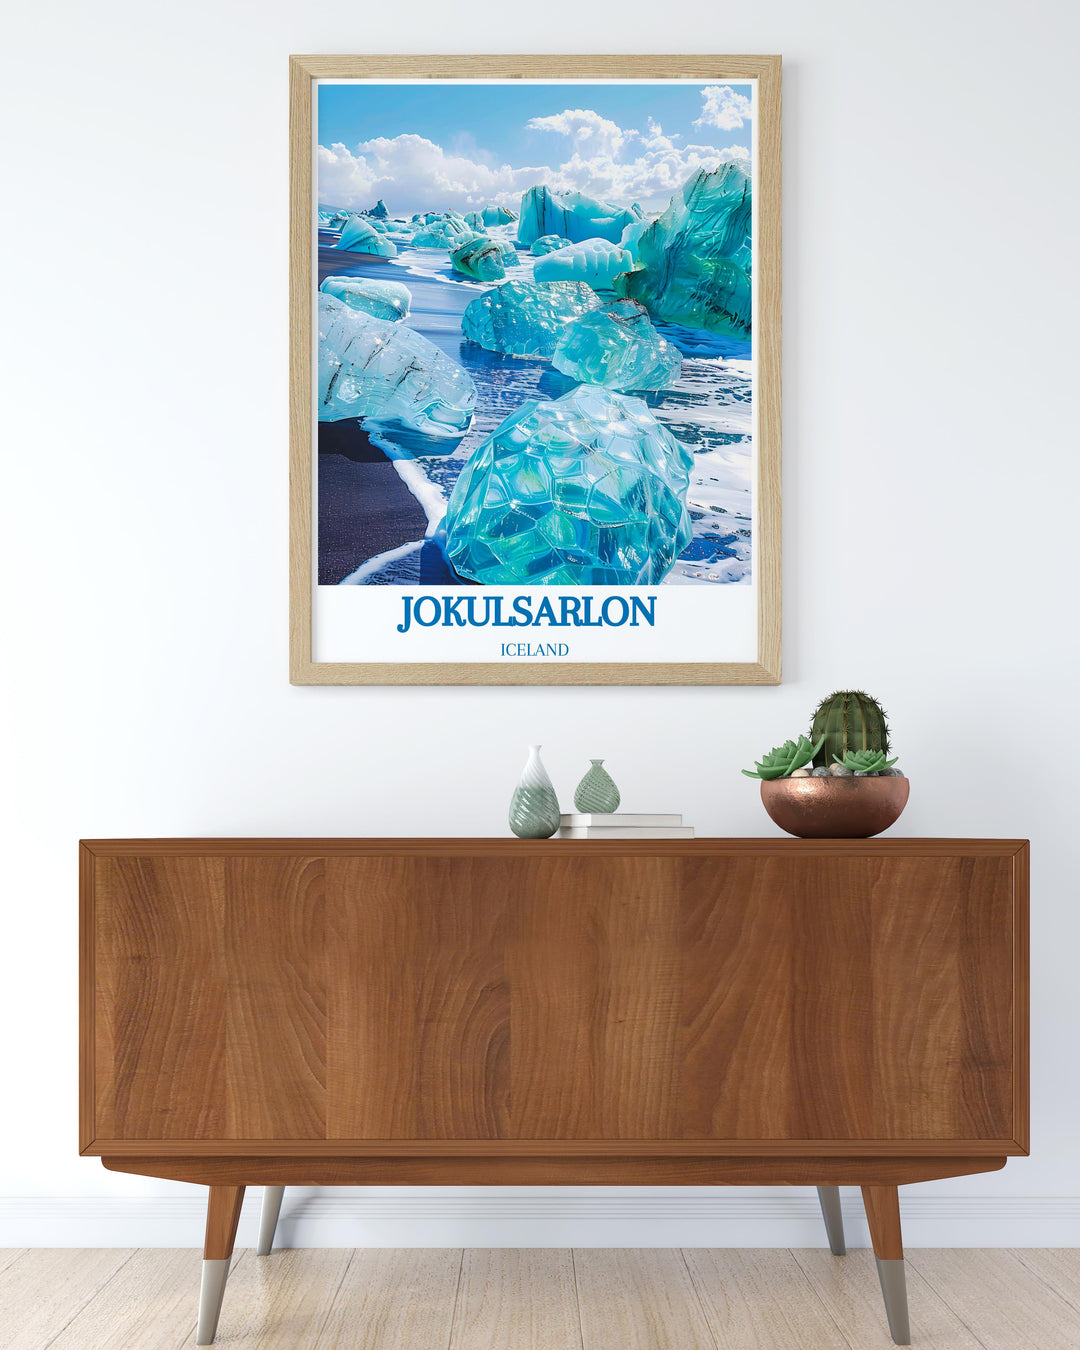 Vintage travel poster of Iceland featuring iconic scenes from Diamond Beach and Jokulsarlon perfect for art collectors